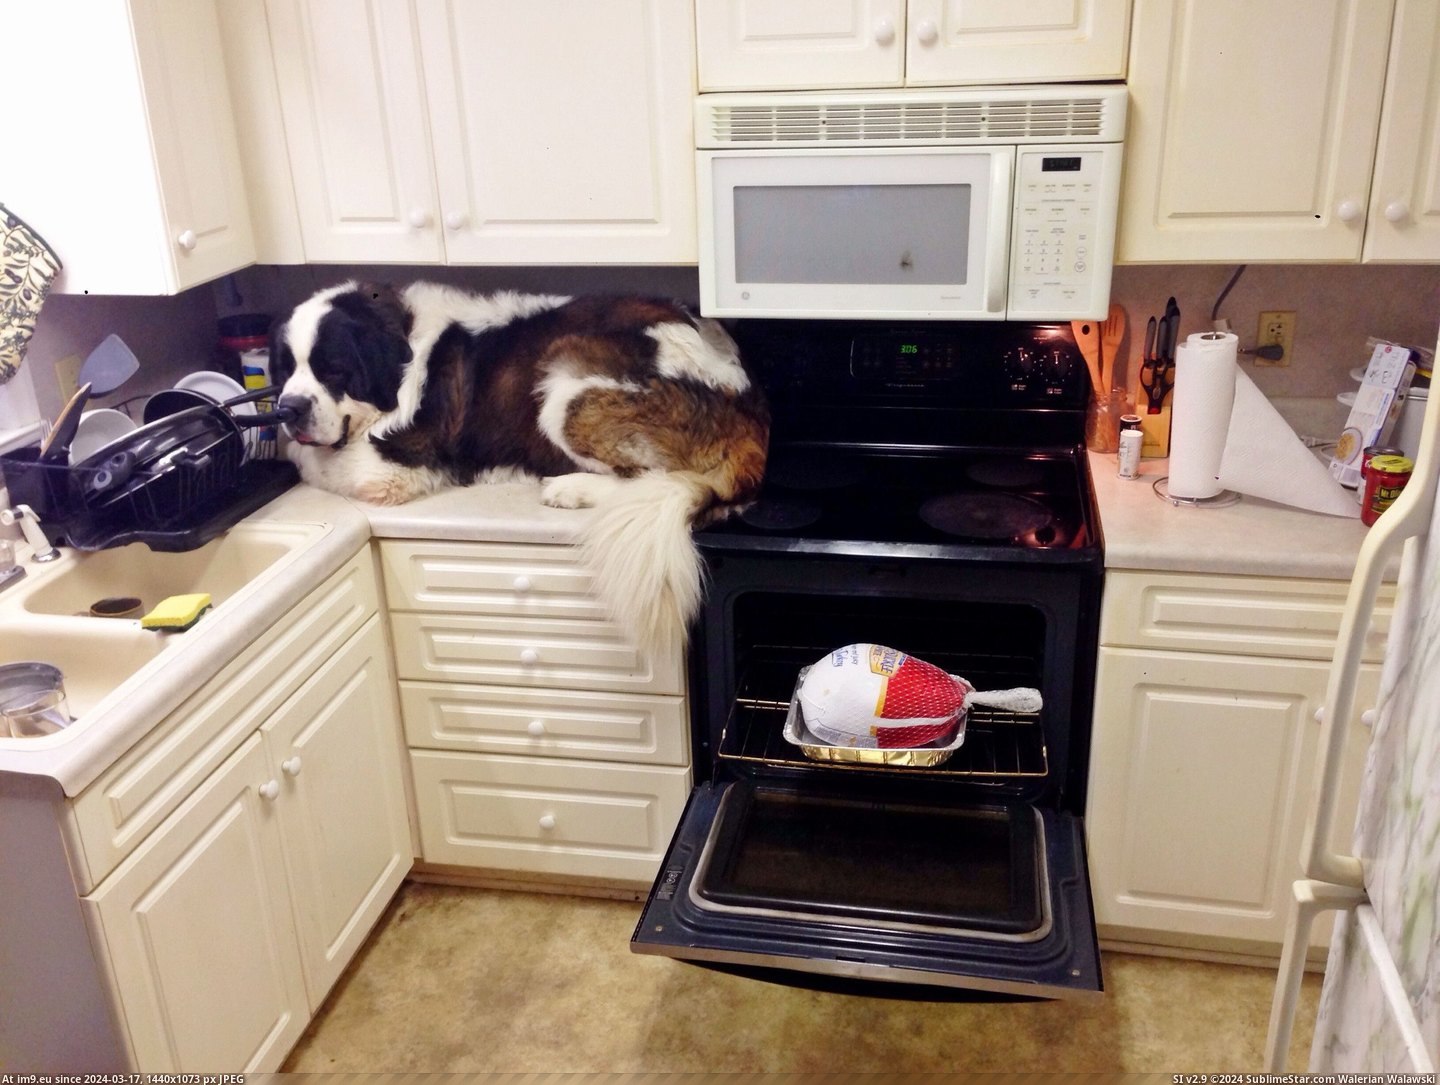 #Funny #Had #Him #Counter #Habit #Jub #Weirdo #Caught #Laying #Realize [Funny] After I caught him on the counter, I started to realize Jub Jub has always had a habit of laying down like a weirdo. 12 Pic. (Изображение из альбом My r/FUNNY favs))